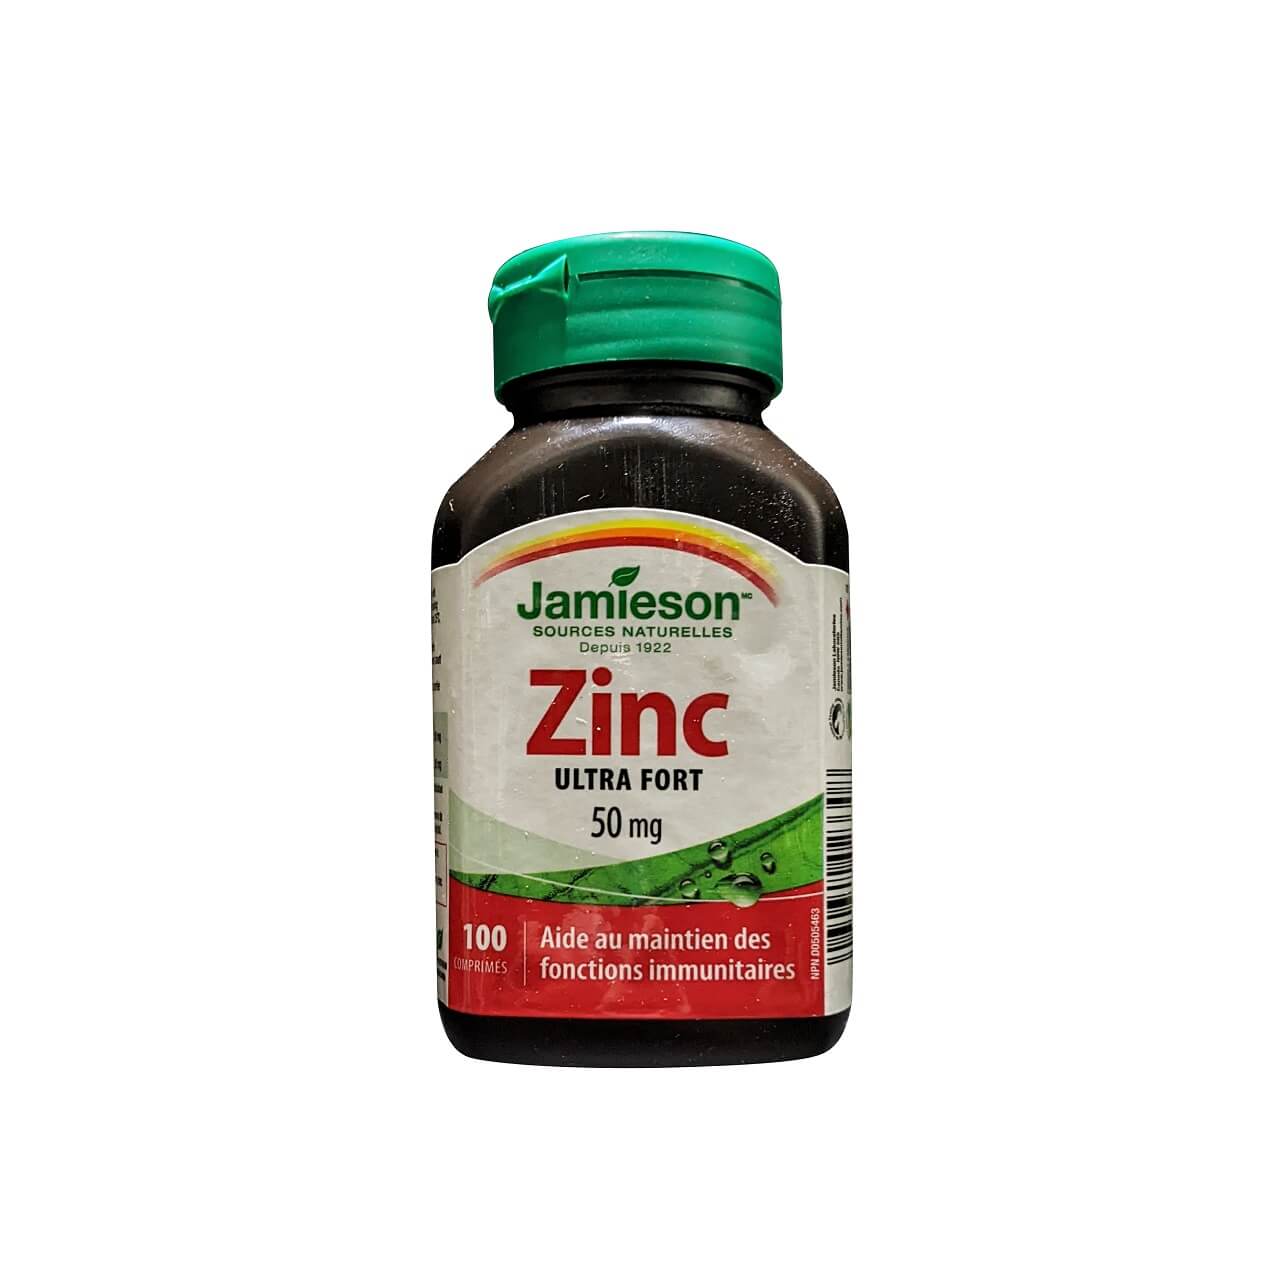 Product label for Jamieson Zinc 50 mg Ultra Strength (100 tablets) in French